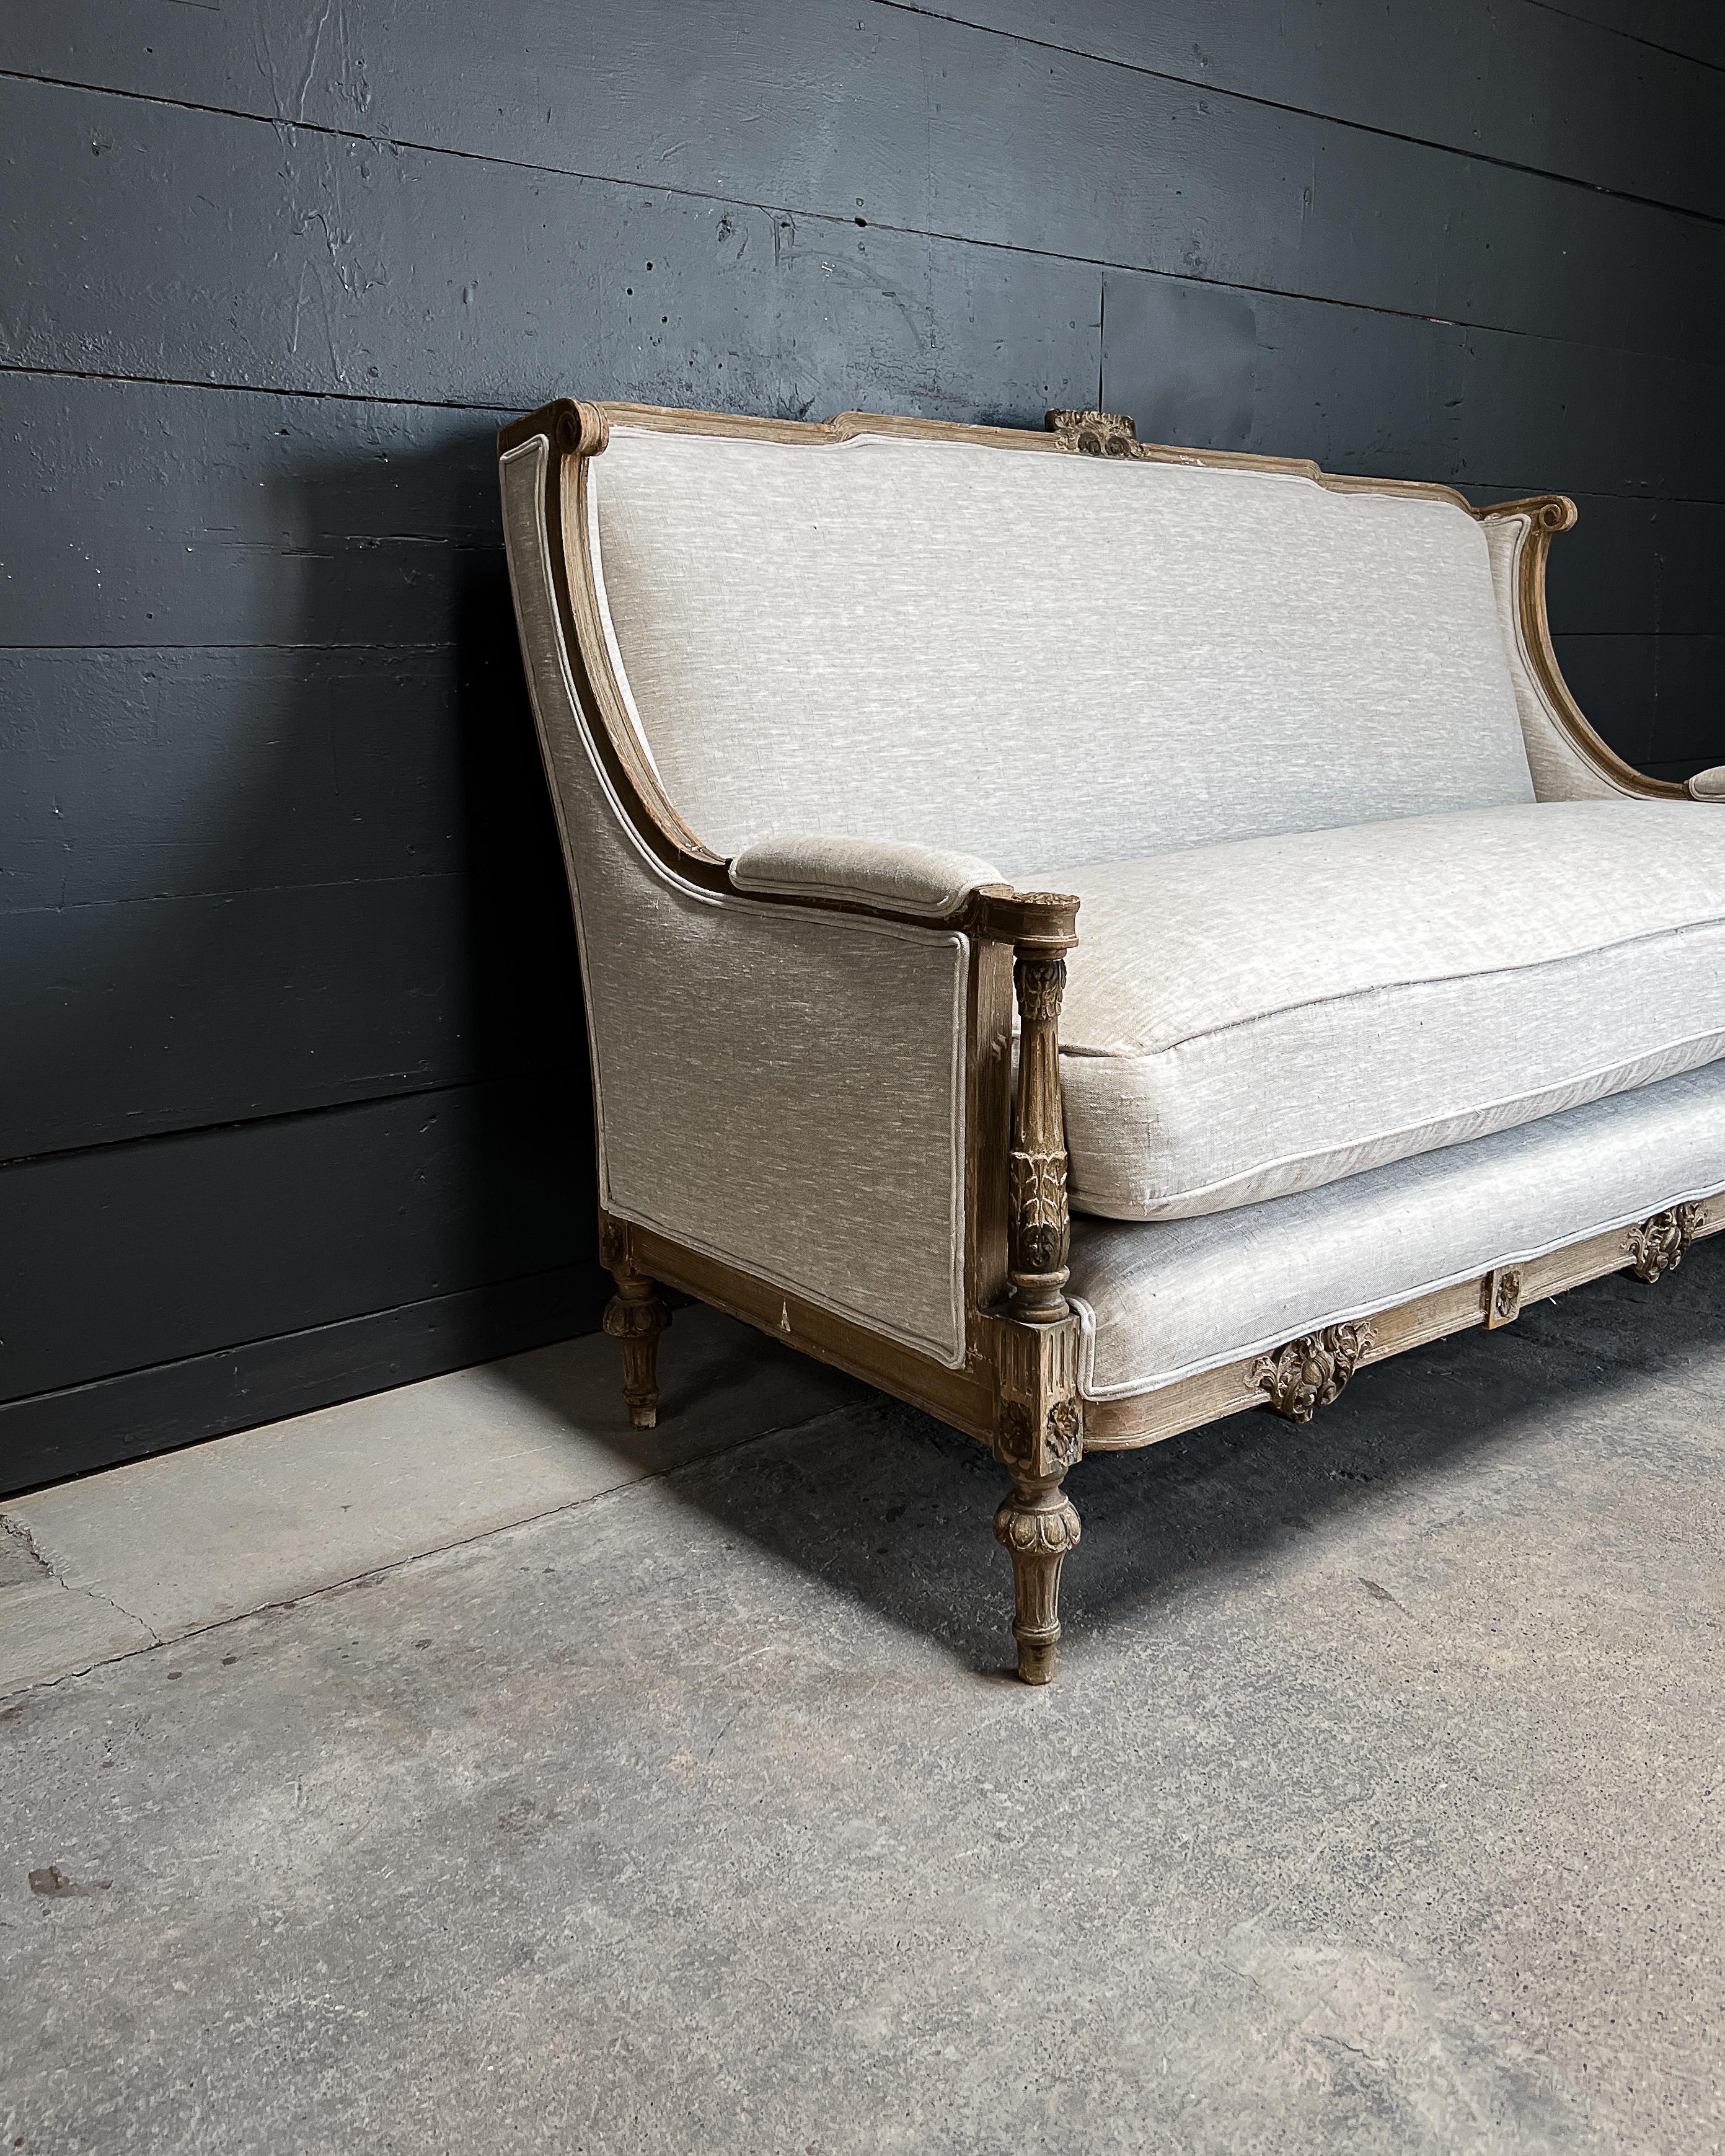 A stunning example of a Louis XVI style sofa with lovely hand-carved details including floral die joins, ornamental whorls, acanthus leaves and fluted legs. The frame features a beautiful distressed patina, while the (recently reupholstered) creamy